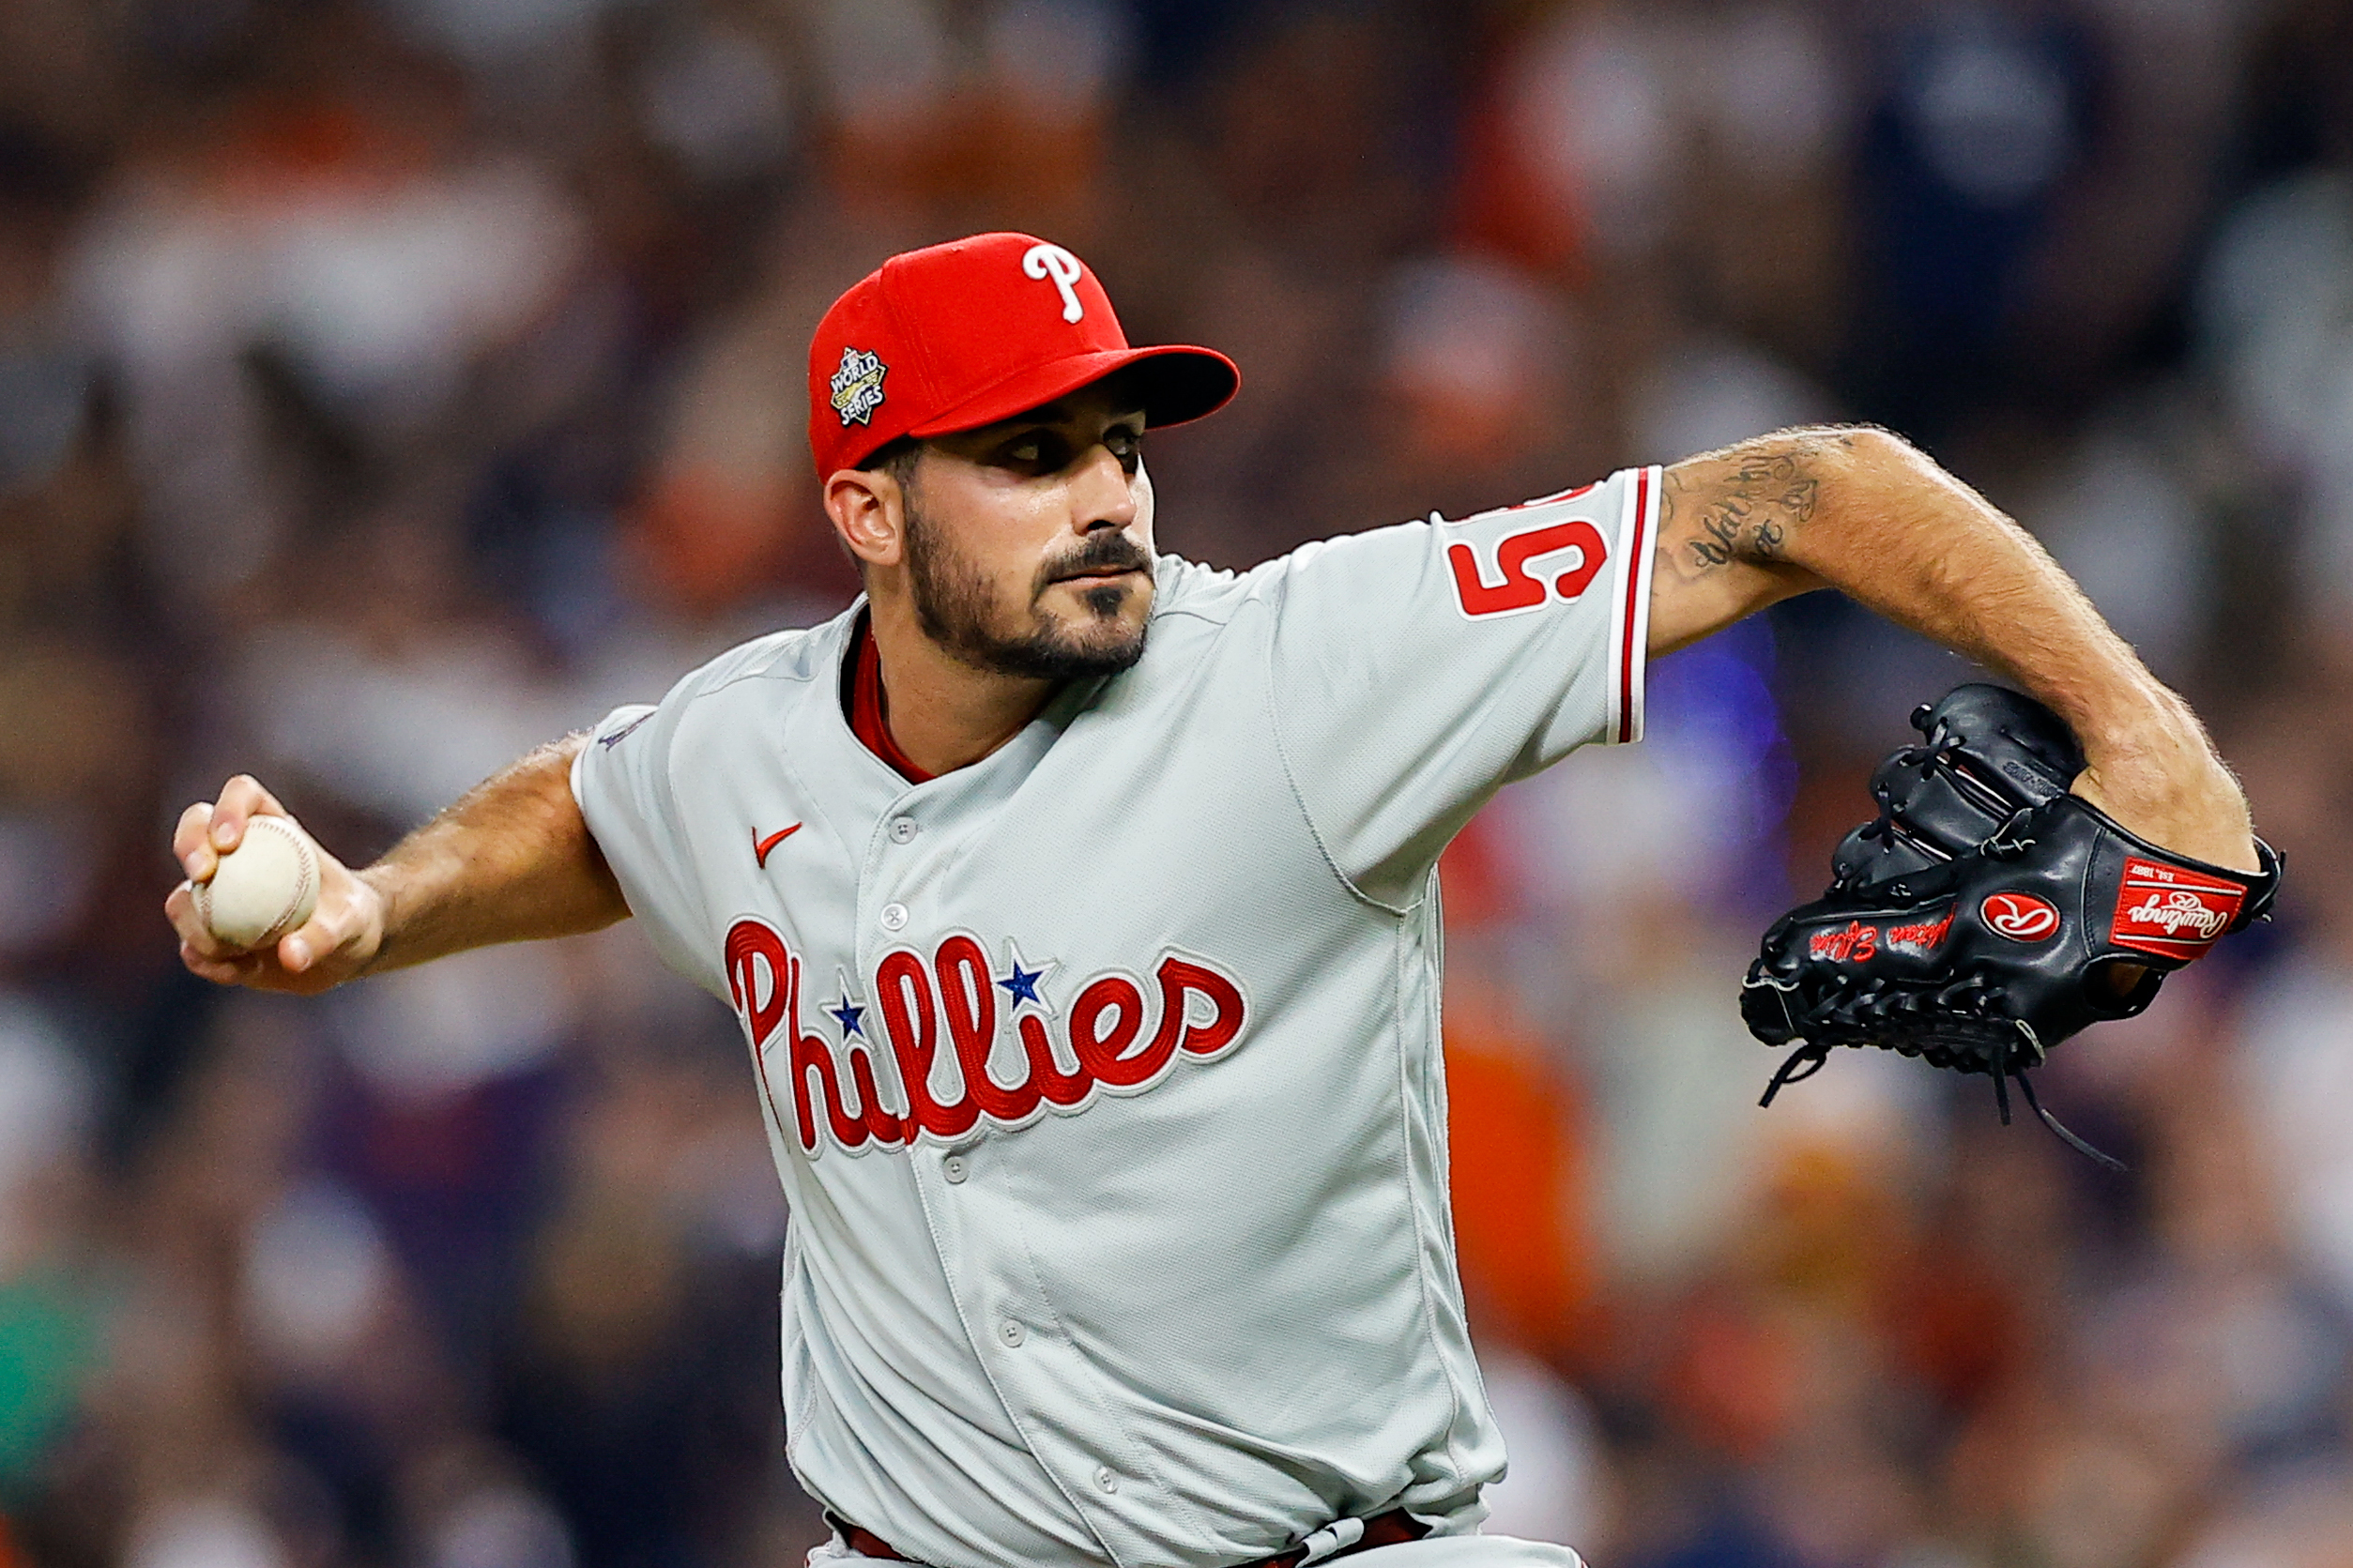 Ranger Suárez has grown into a crucial role with the Phillies by keeping  his cool